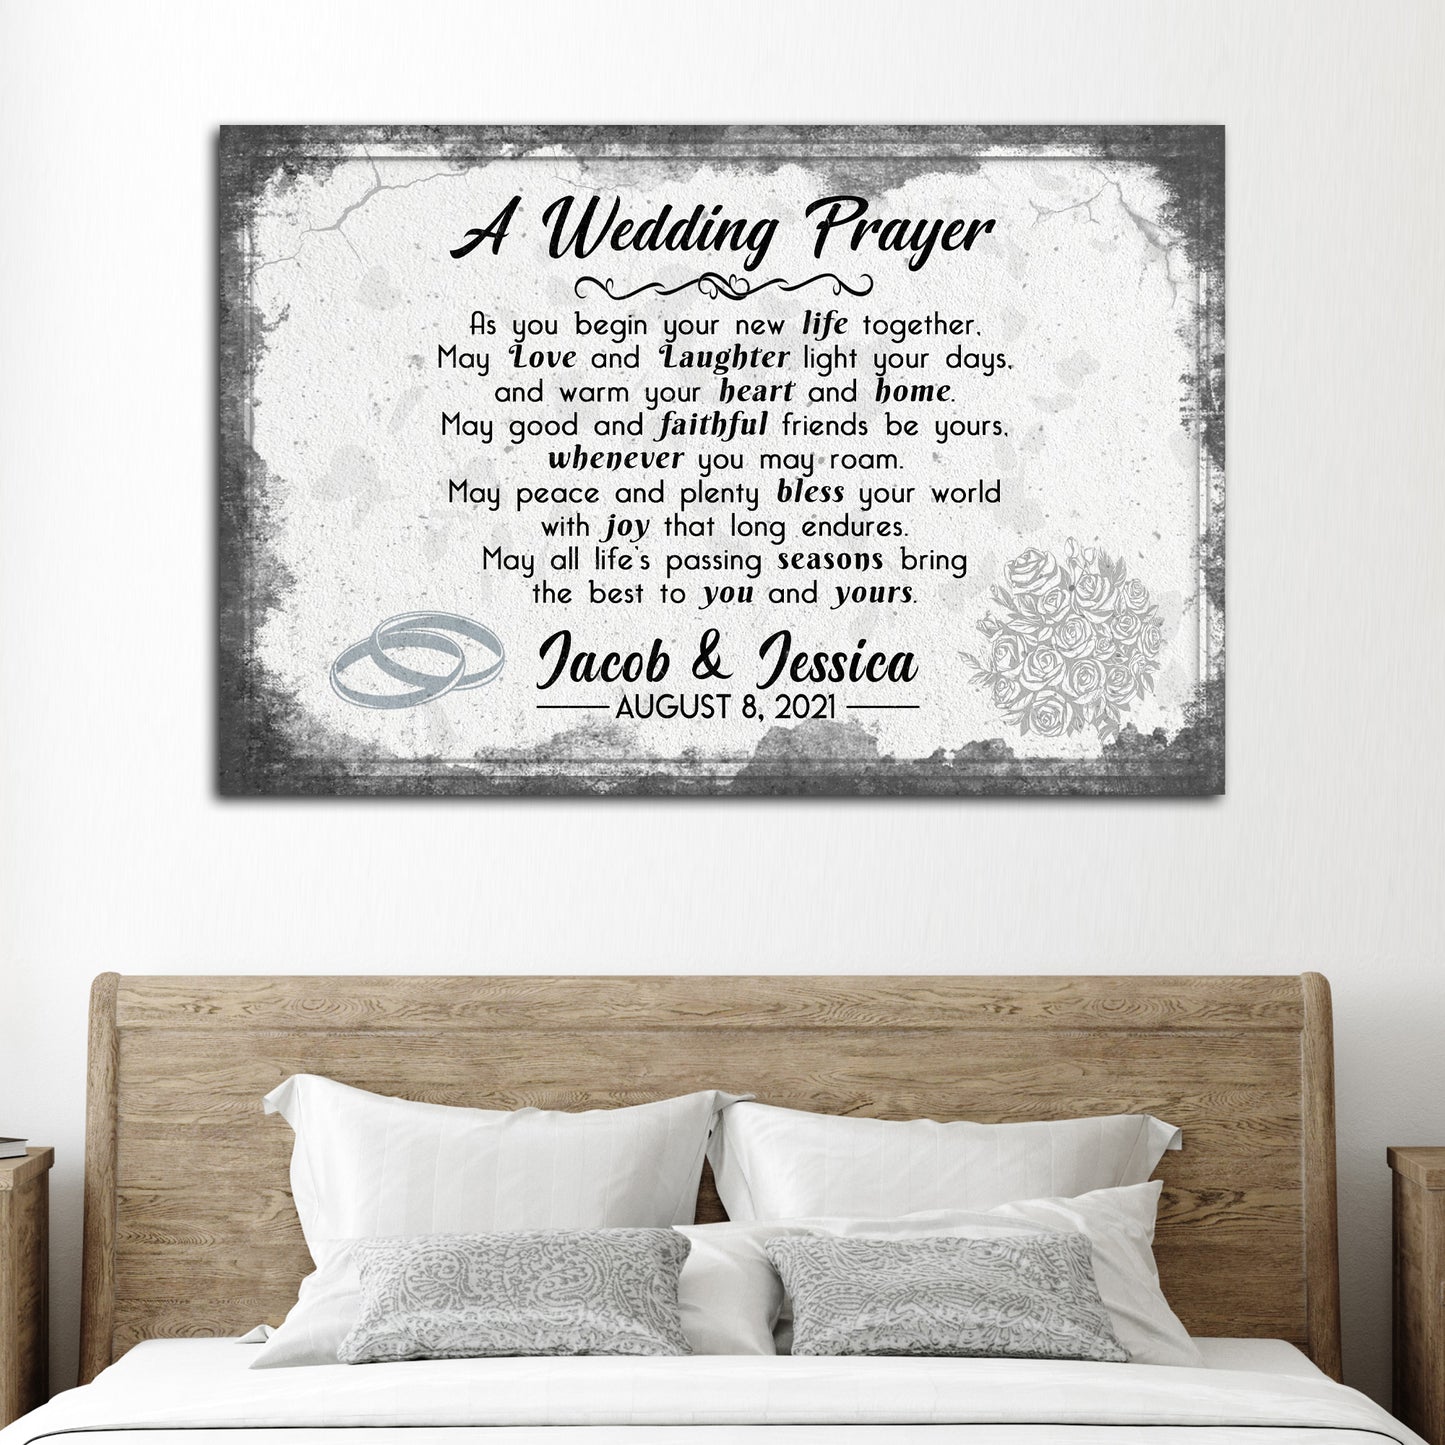 A Wedding Prayer Sign  - Image by Tailored Canvases